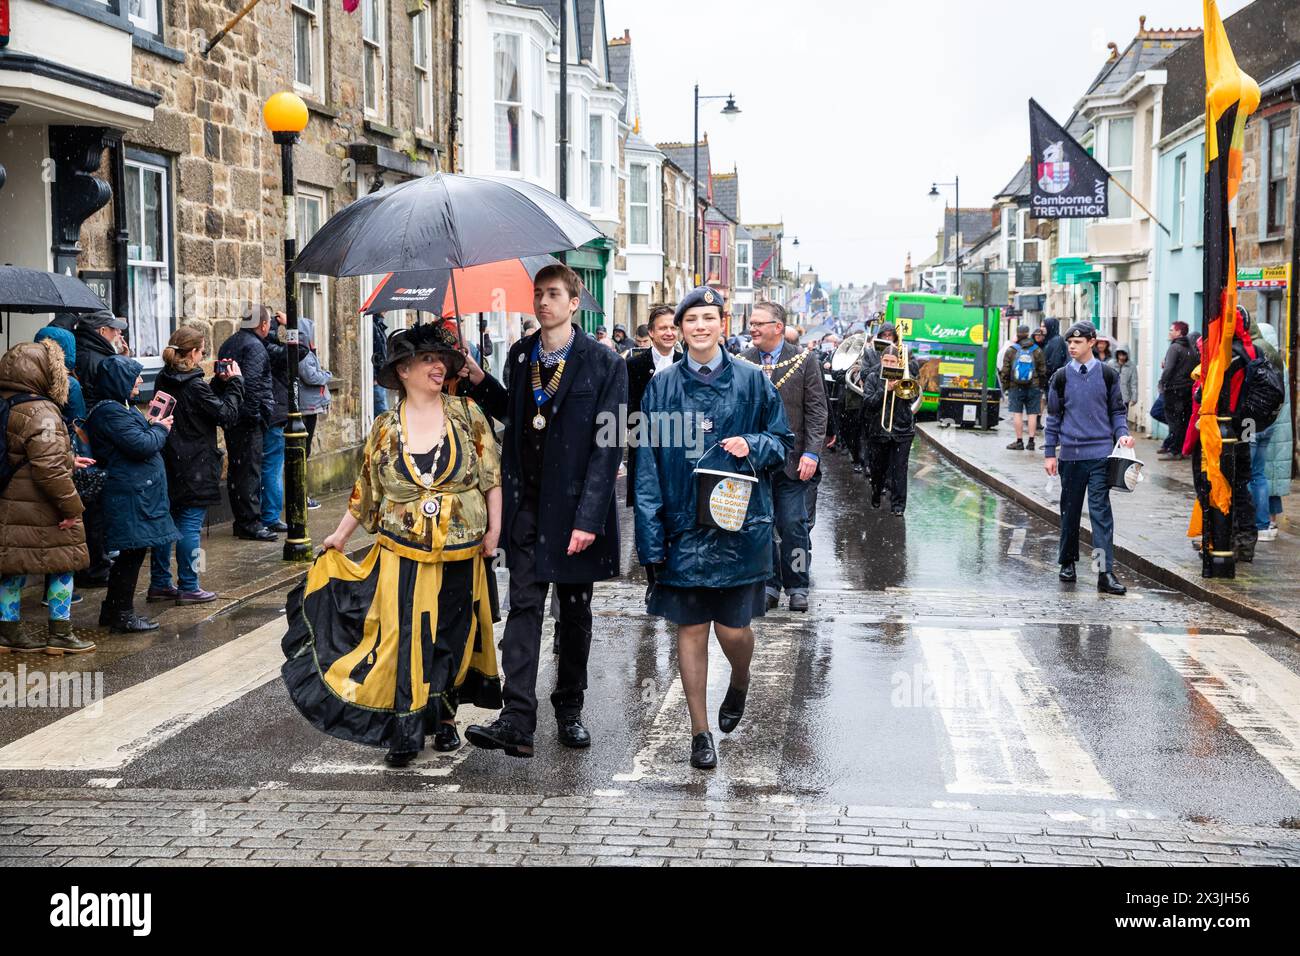 Camborne, Cornwall, UK. 27th Apr, 2024. Despite heavy rainfall, Trevithick Day celebrations continued. The event which drew about 25-35,000 people started early morning with Kernow Pipes and Drummers procession followed by a Bal Maiden and Miners Children's Dance. In the afternoon there was an adults Trevithick dance followed by the main event of the day which was a large parade of Steam Traction Engines. Credit: Keith Larby/Alamy Live News Stock Photo